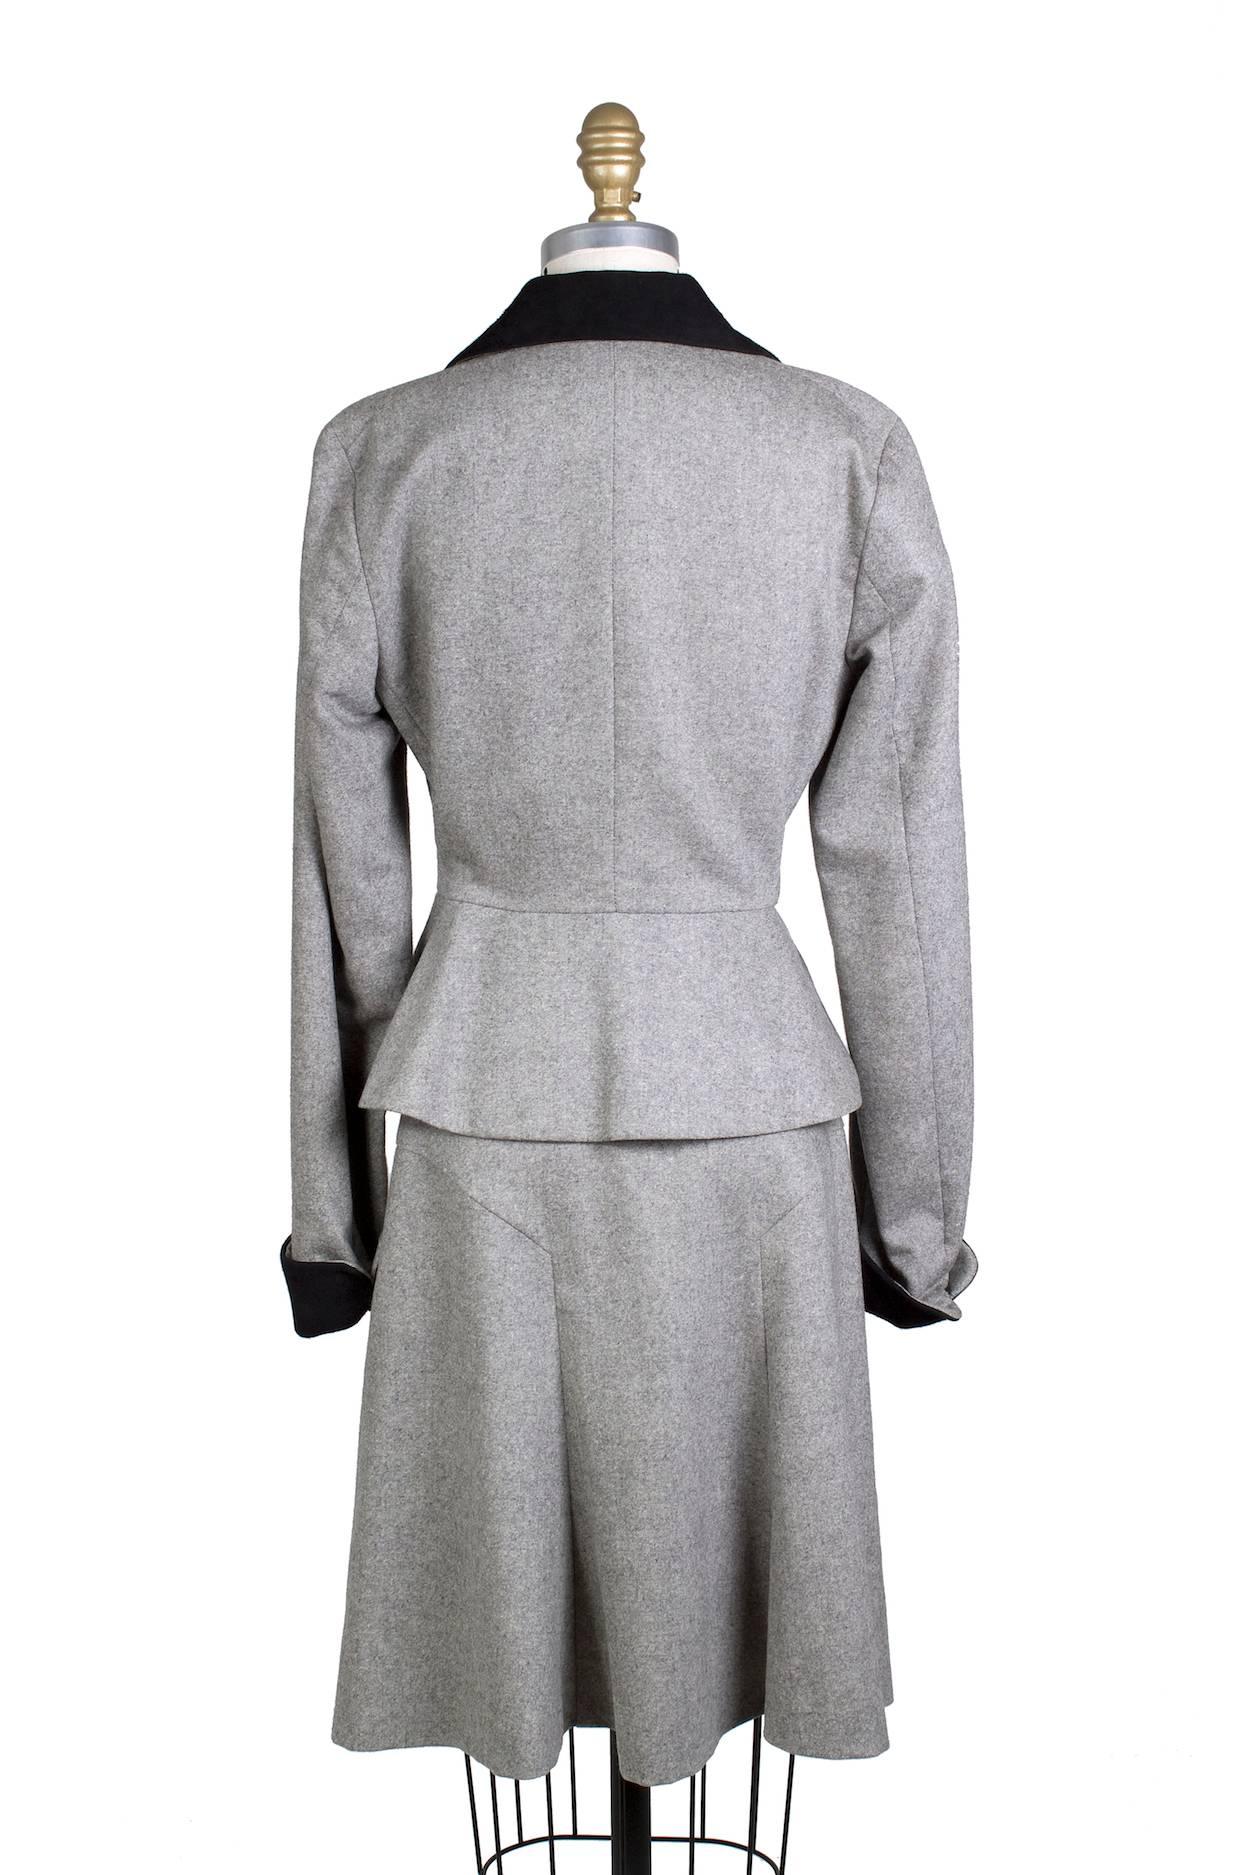 This is a skirt suit by Vivienne Westwood from recent.  It is made from grey wool with black cuffs and collar and features a belted jacket with button closure.  Zipper and button closure on skirt and both pieces are lined in a beige satin.

Skirt